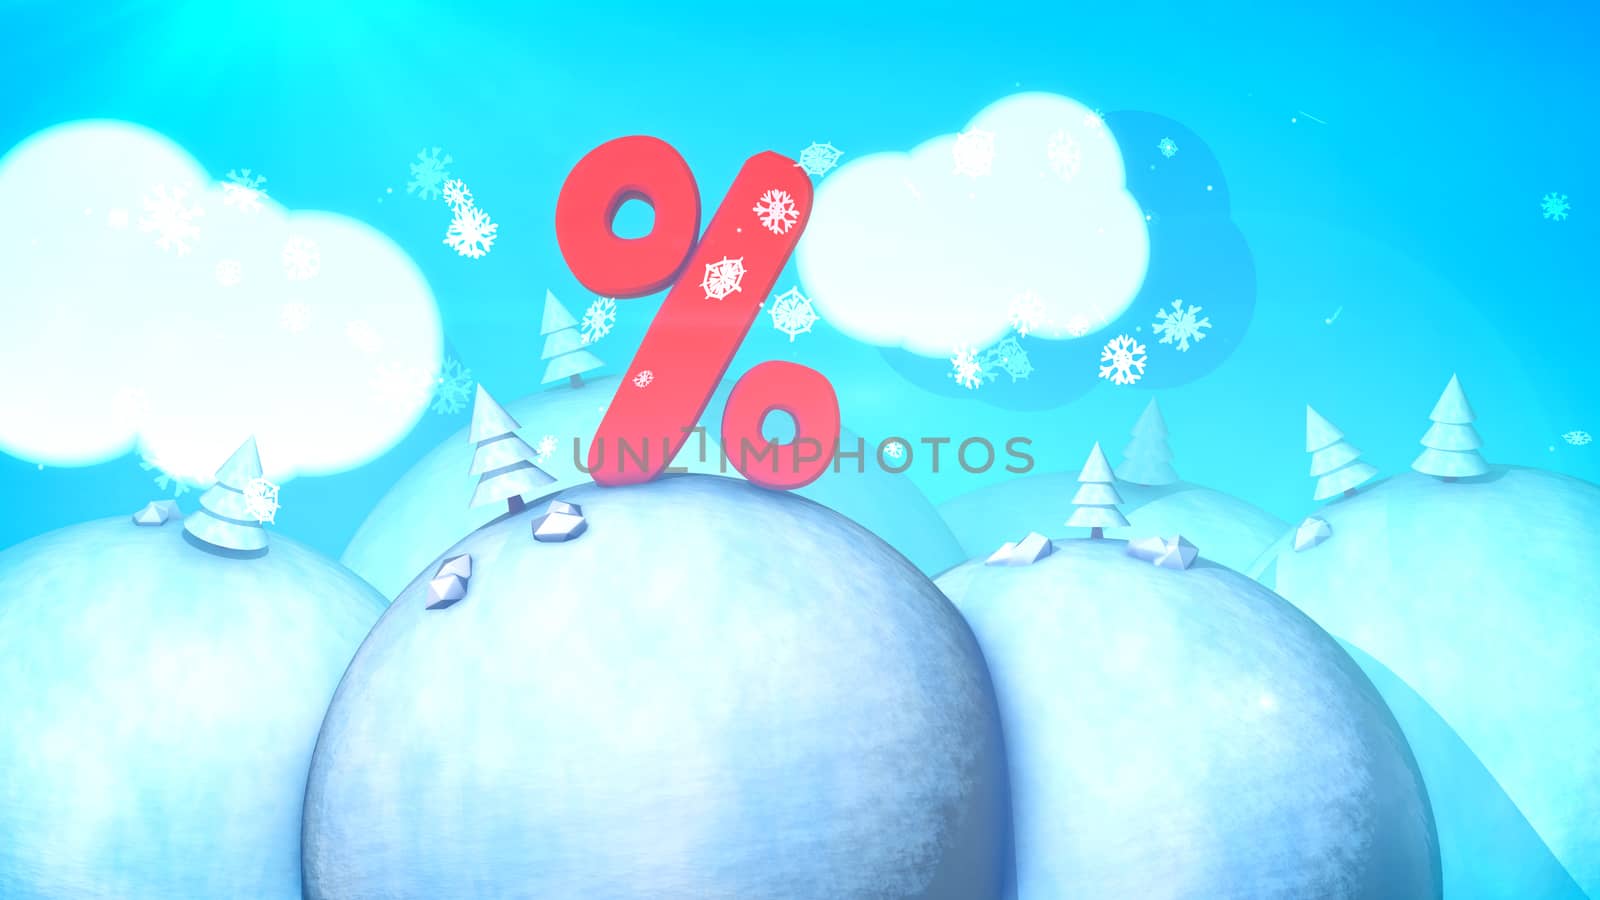 A hilarious 3d illustration of a sunny winter landscape with snowy hills, pine trees, white meadows, soaring snowflakes and blue sky with nice fluffy clouds, big per cent symbol.